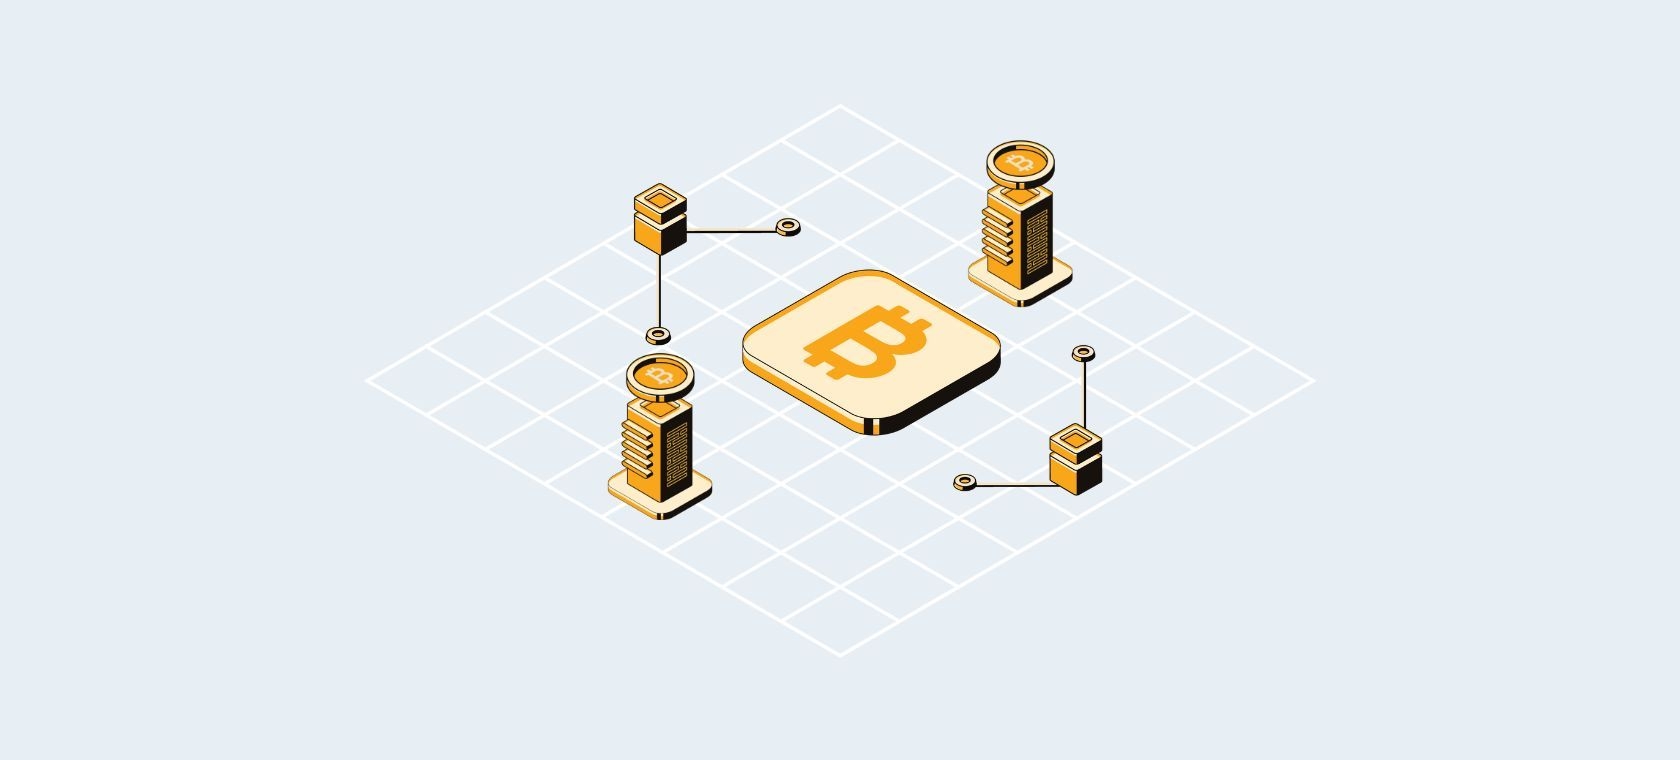 What is Bitcoin? - An Introduction to Blockchain Technology